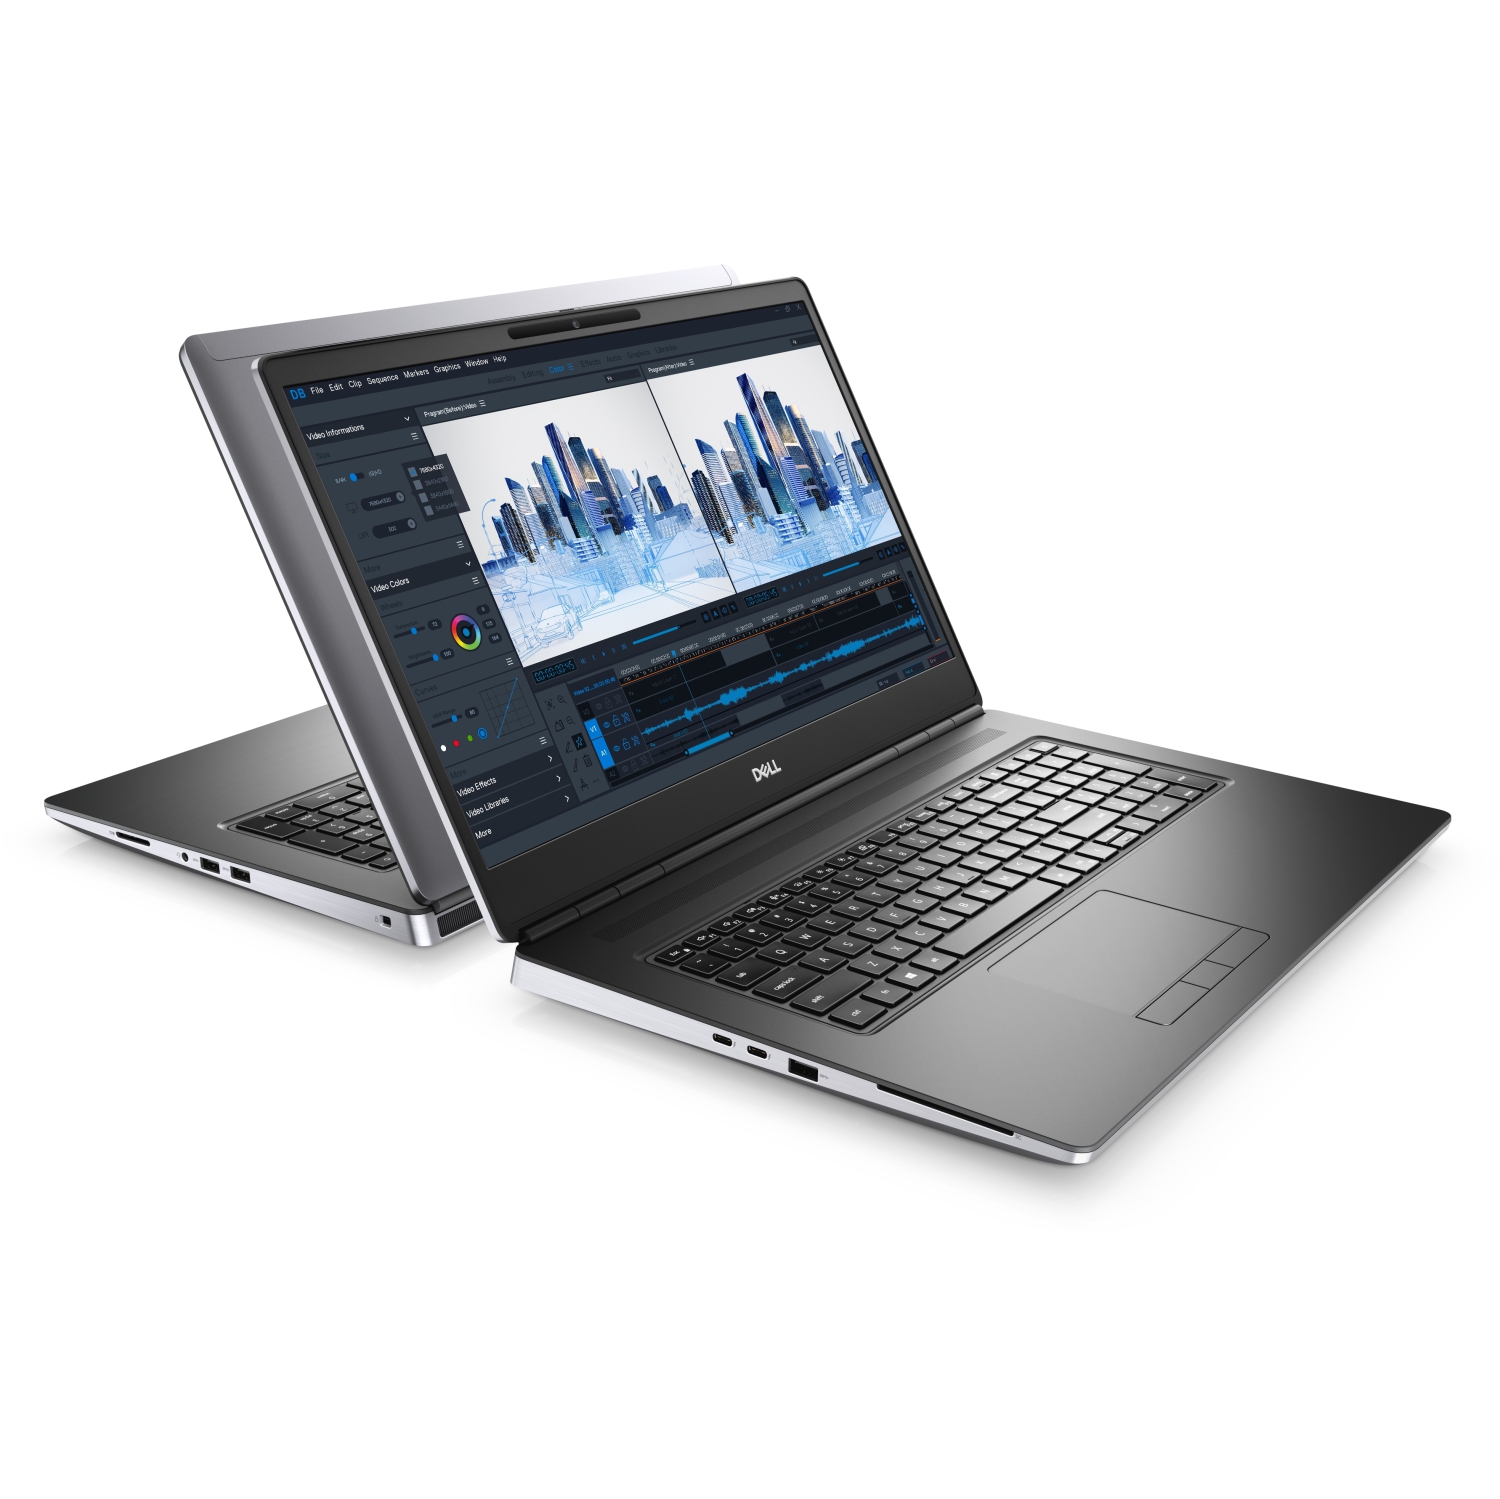 Refurbished (Excellent) – Dell Precision 7000 7760 Workstation Laptop (2021) | 17.3" FHD | Core i7 - 512GB SSD - 32GB RAM - RTX A4000 | 8 Cores @ 4.8 GHz - 11th Gen CPU - 8GB GDDR6